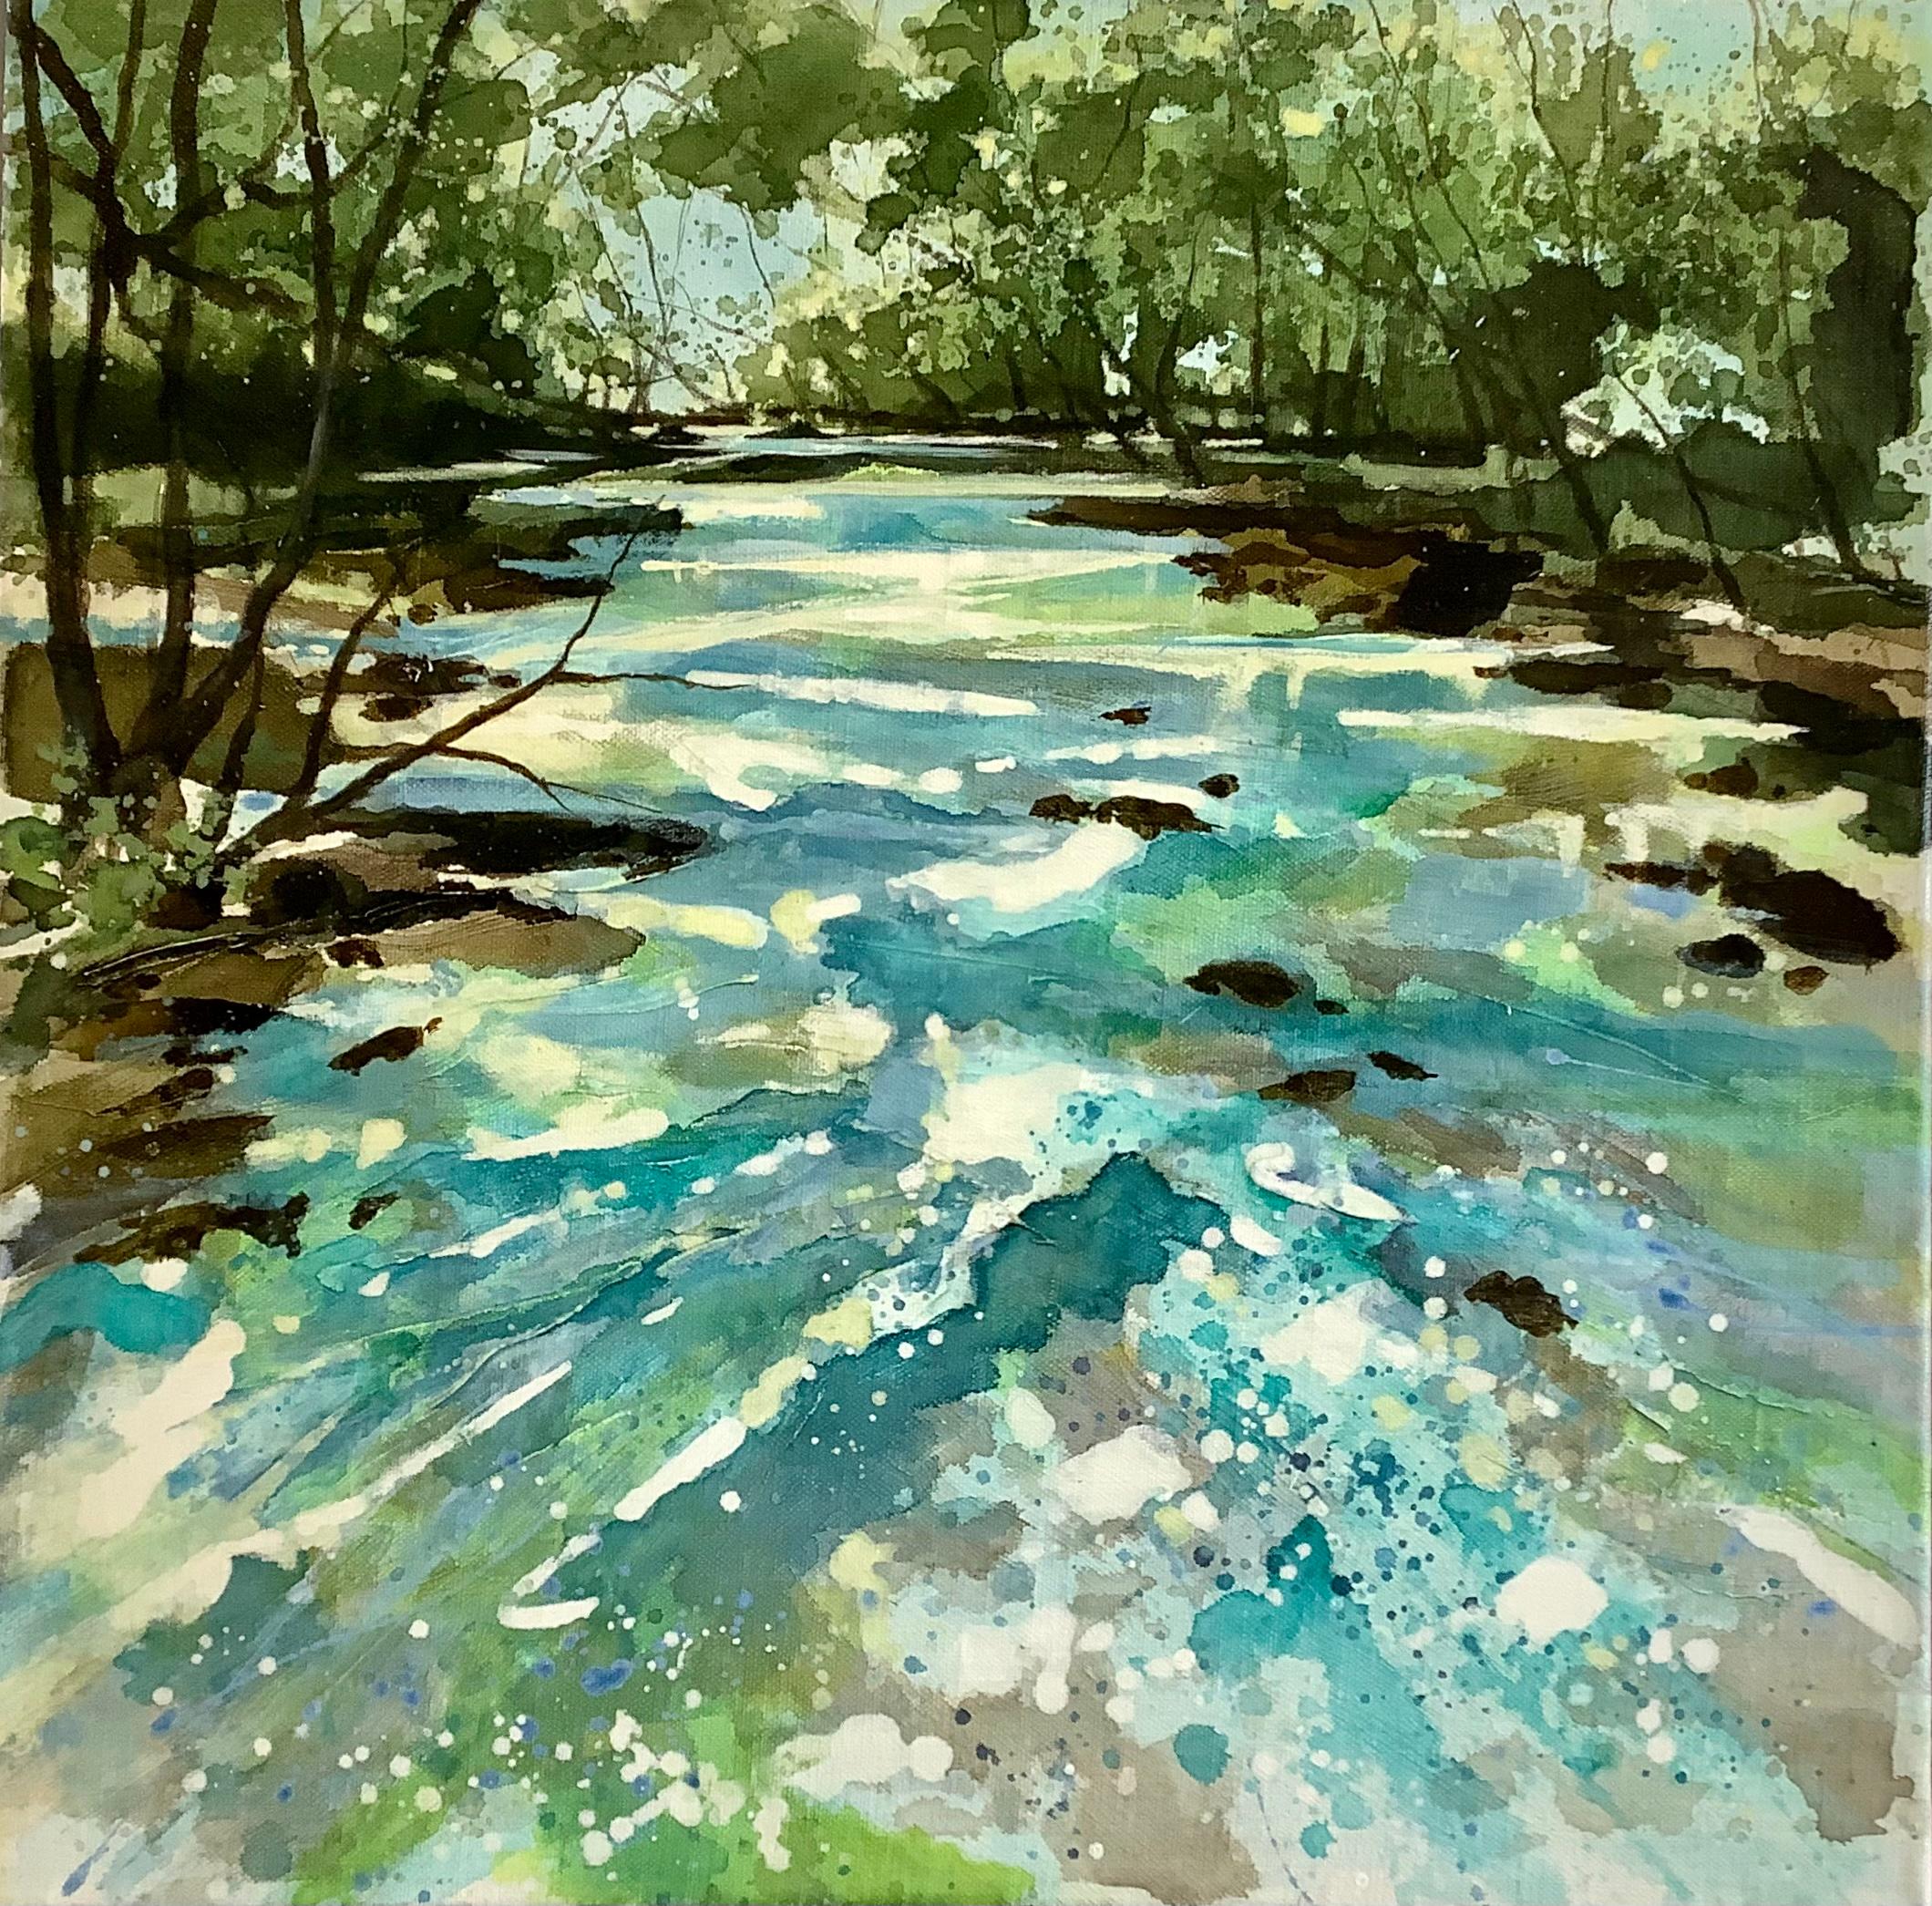 Abstract Painting Adele Riley - Peinture originale de paysage, River Wye, Hereford, Green